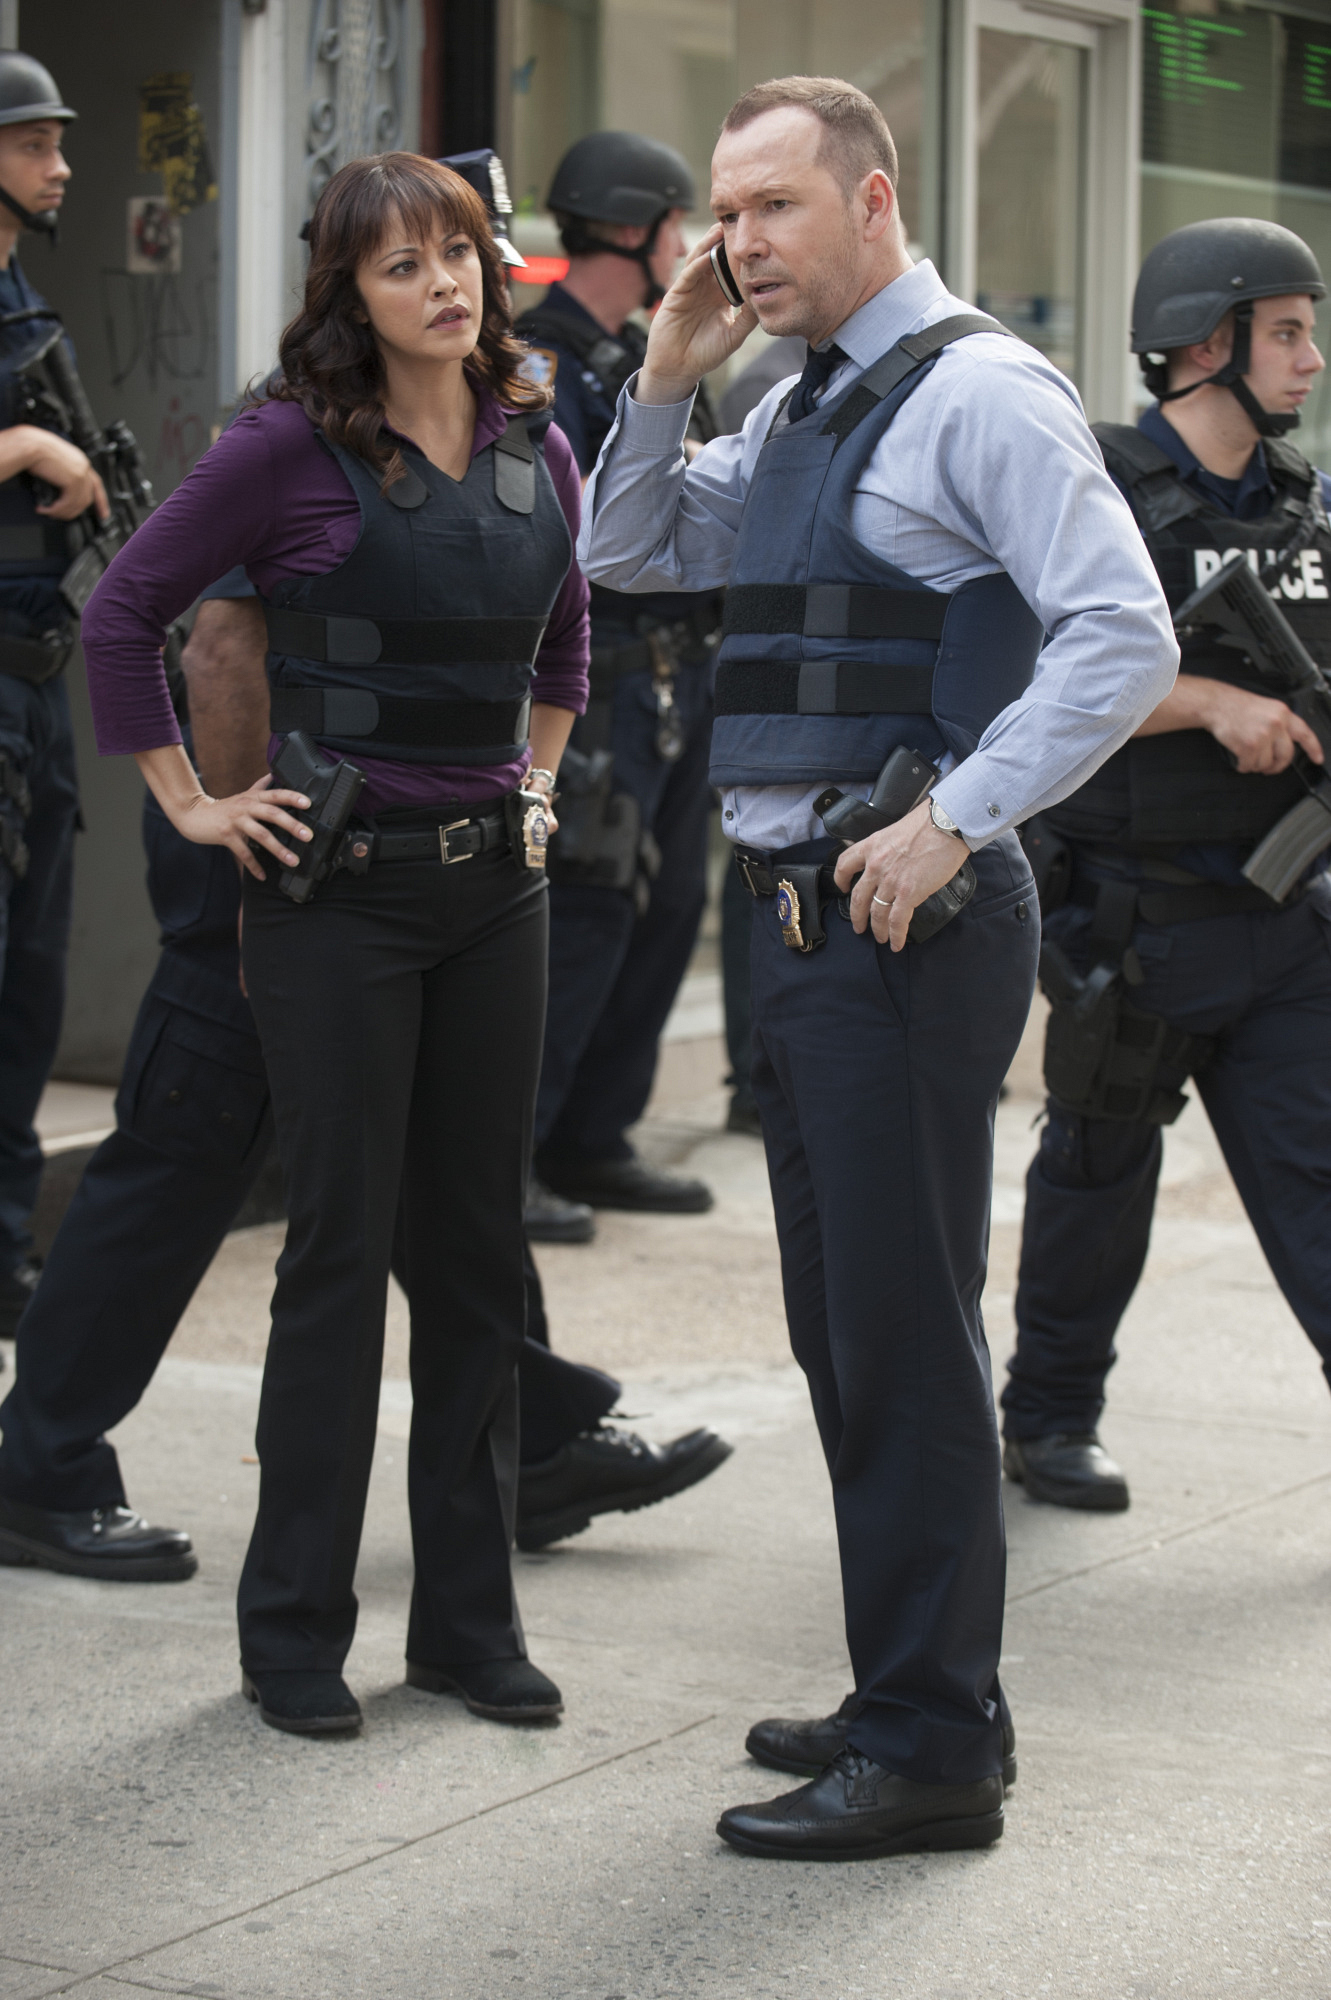 First Look: Danny's Past Resurfaces On Blue Bloods - Page 3 - Blue Bloods Photos - CBS.com